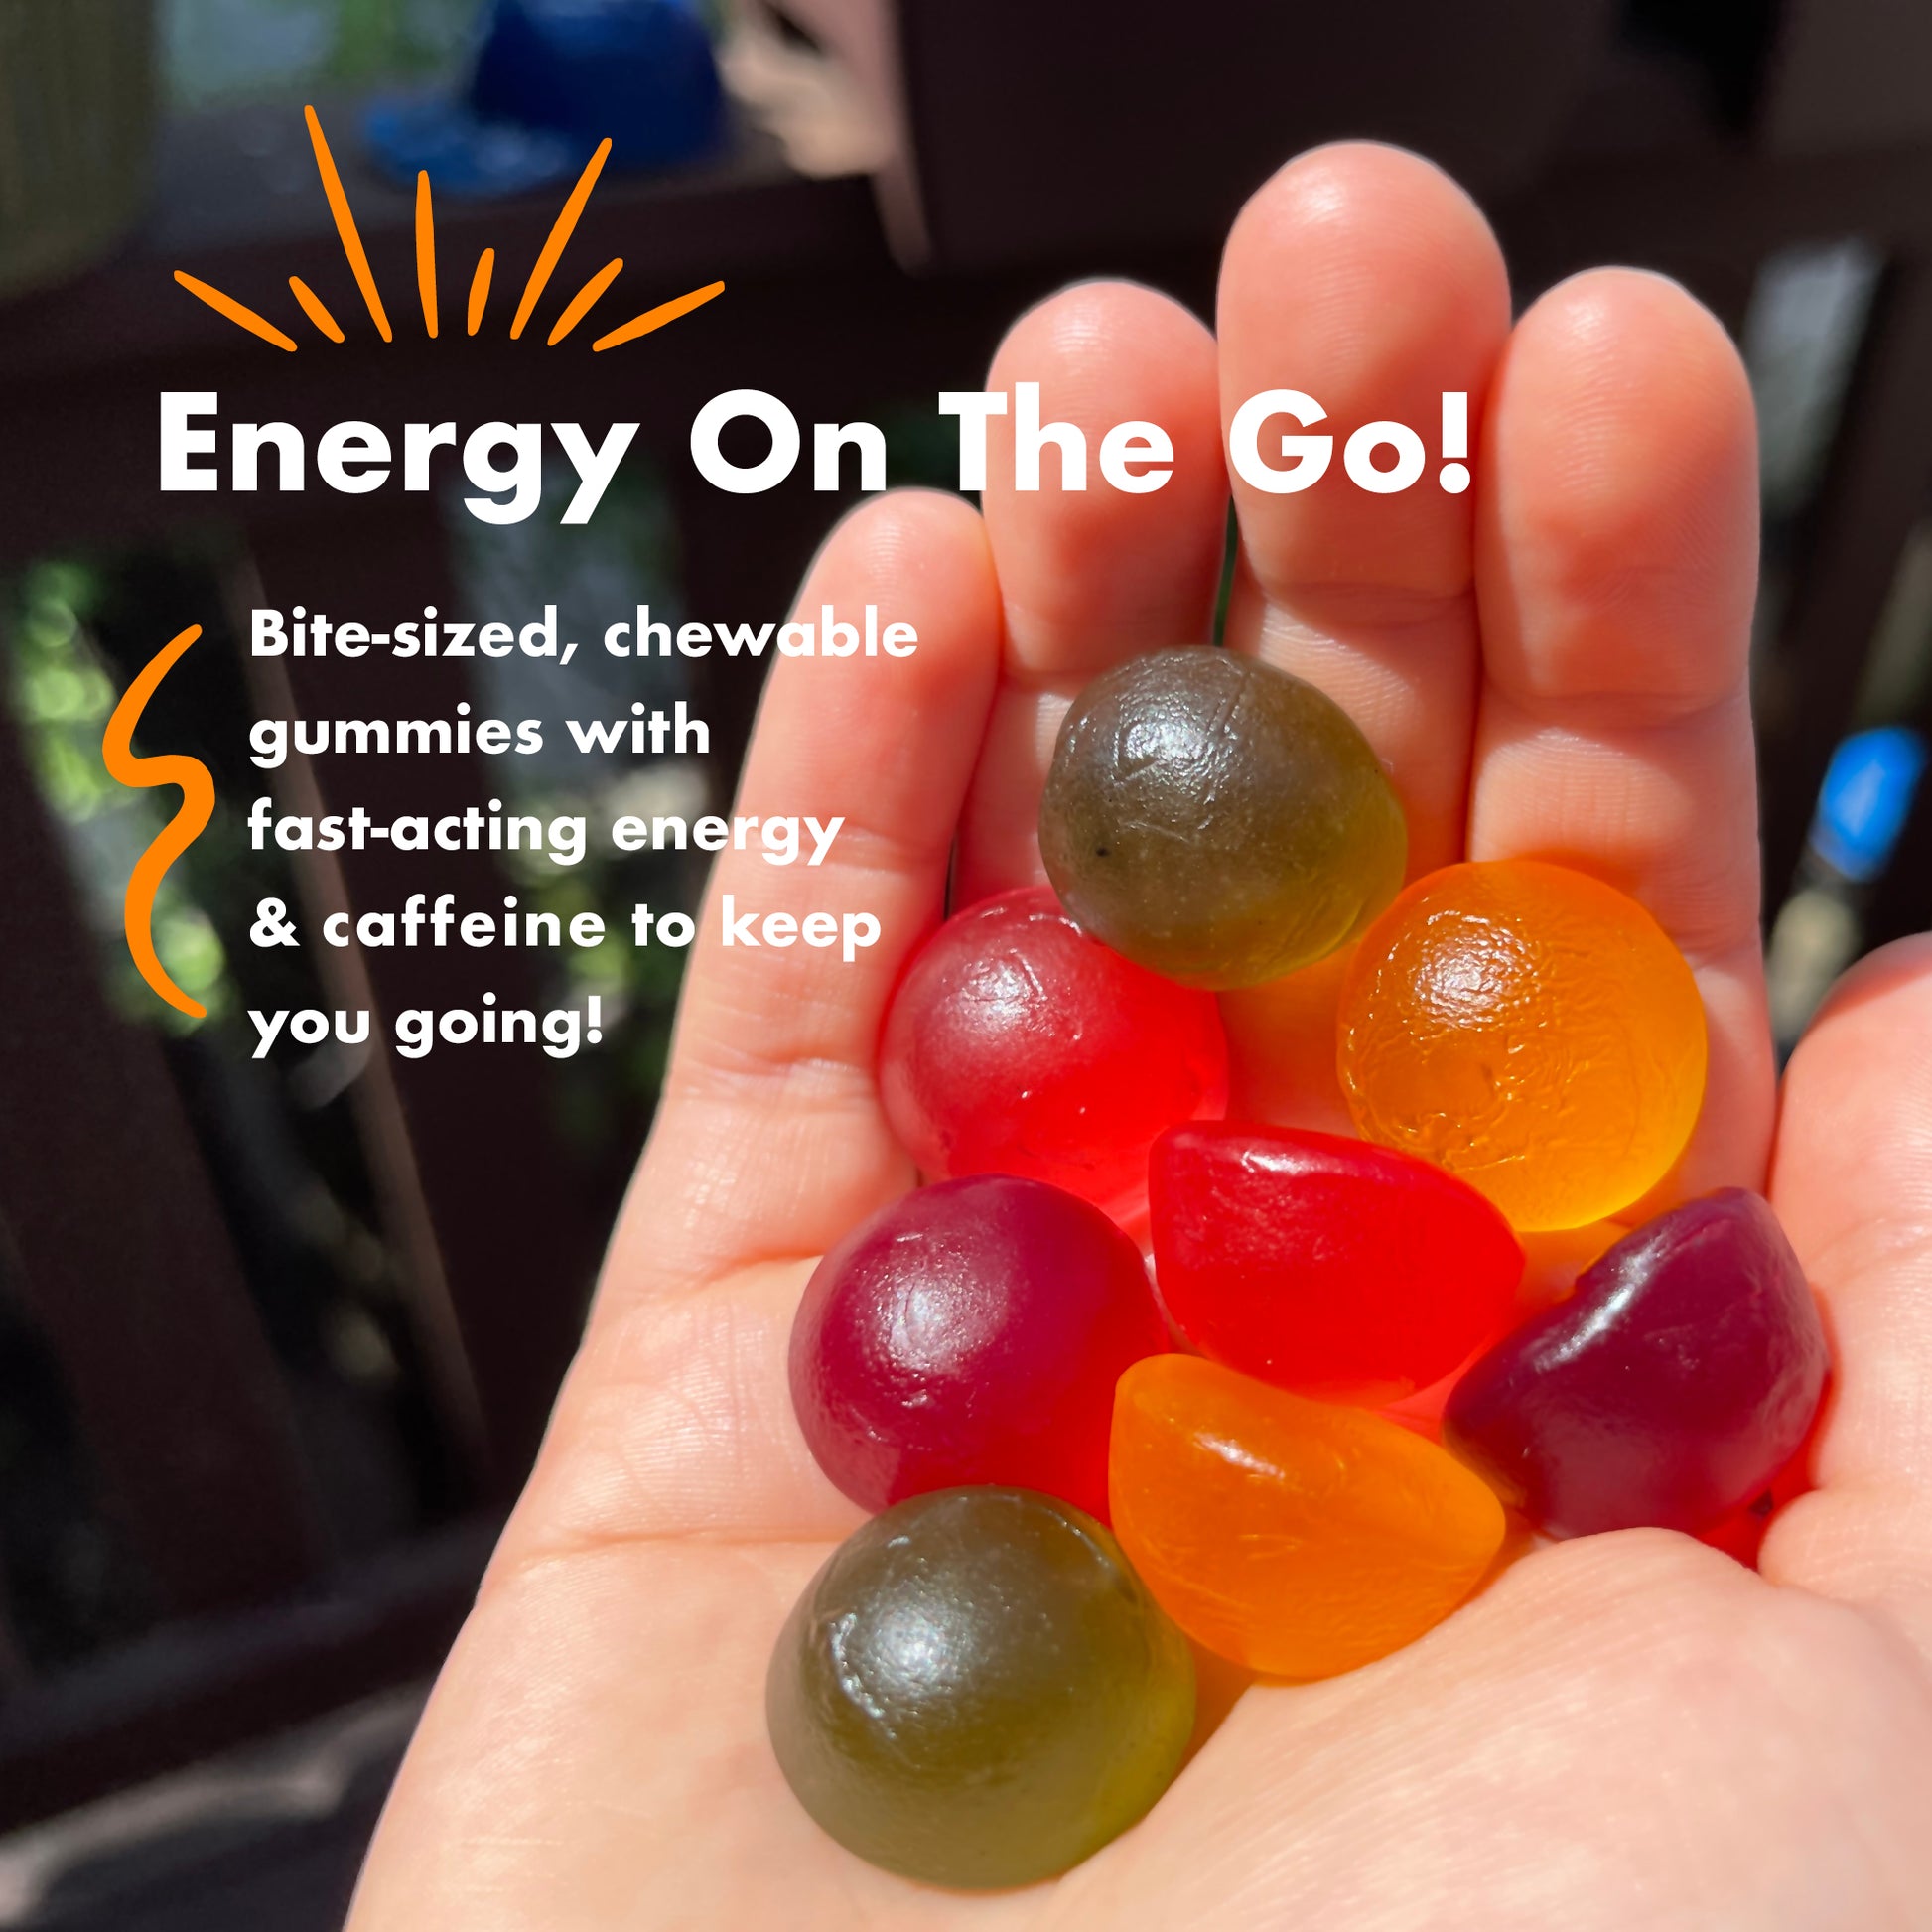 Bonk Breaker Chews are great for energy on the go! Bite-sized chewable gummies with fast-acting energy & caffeine to keep you going!